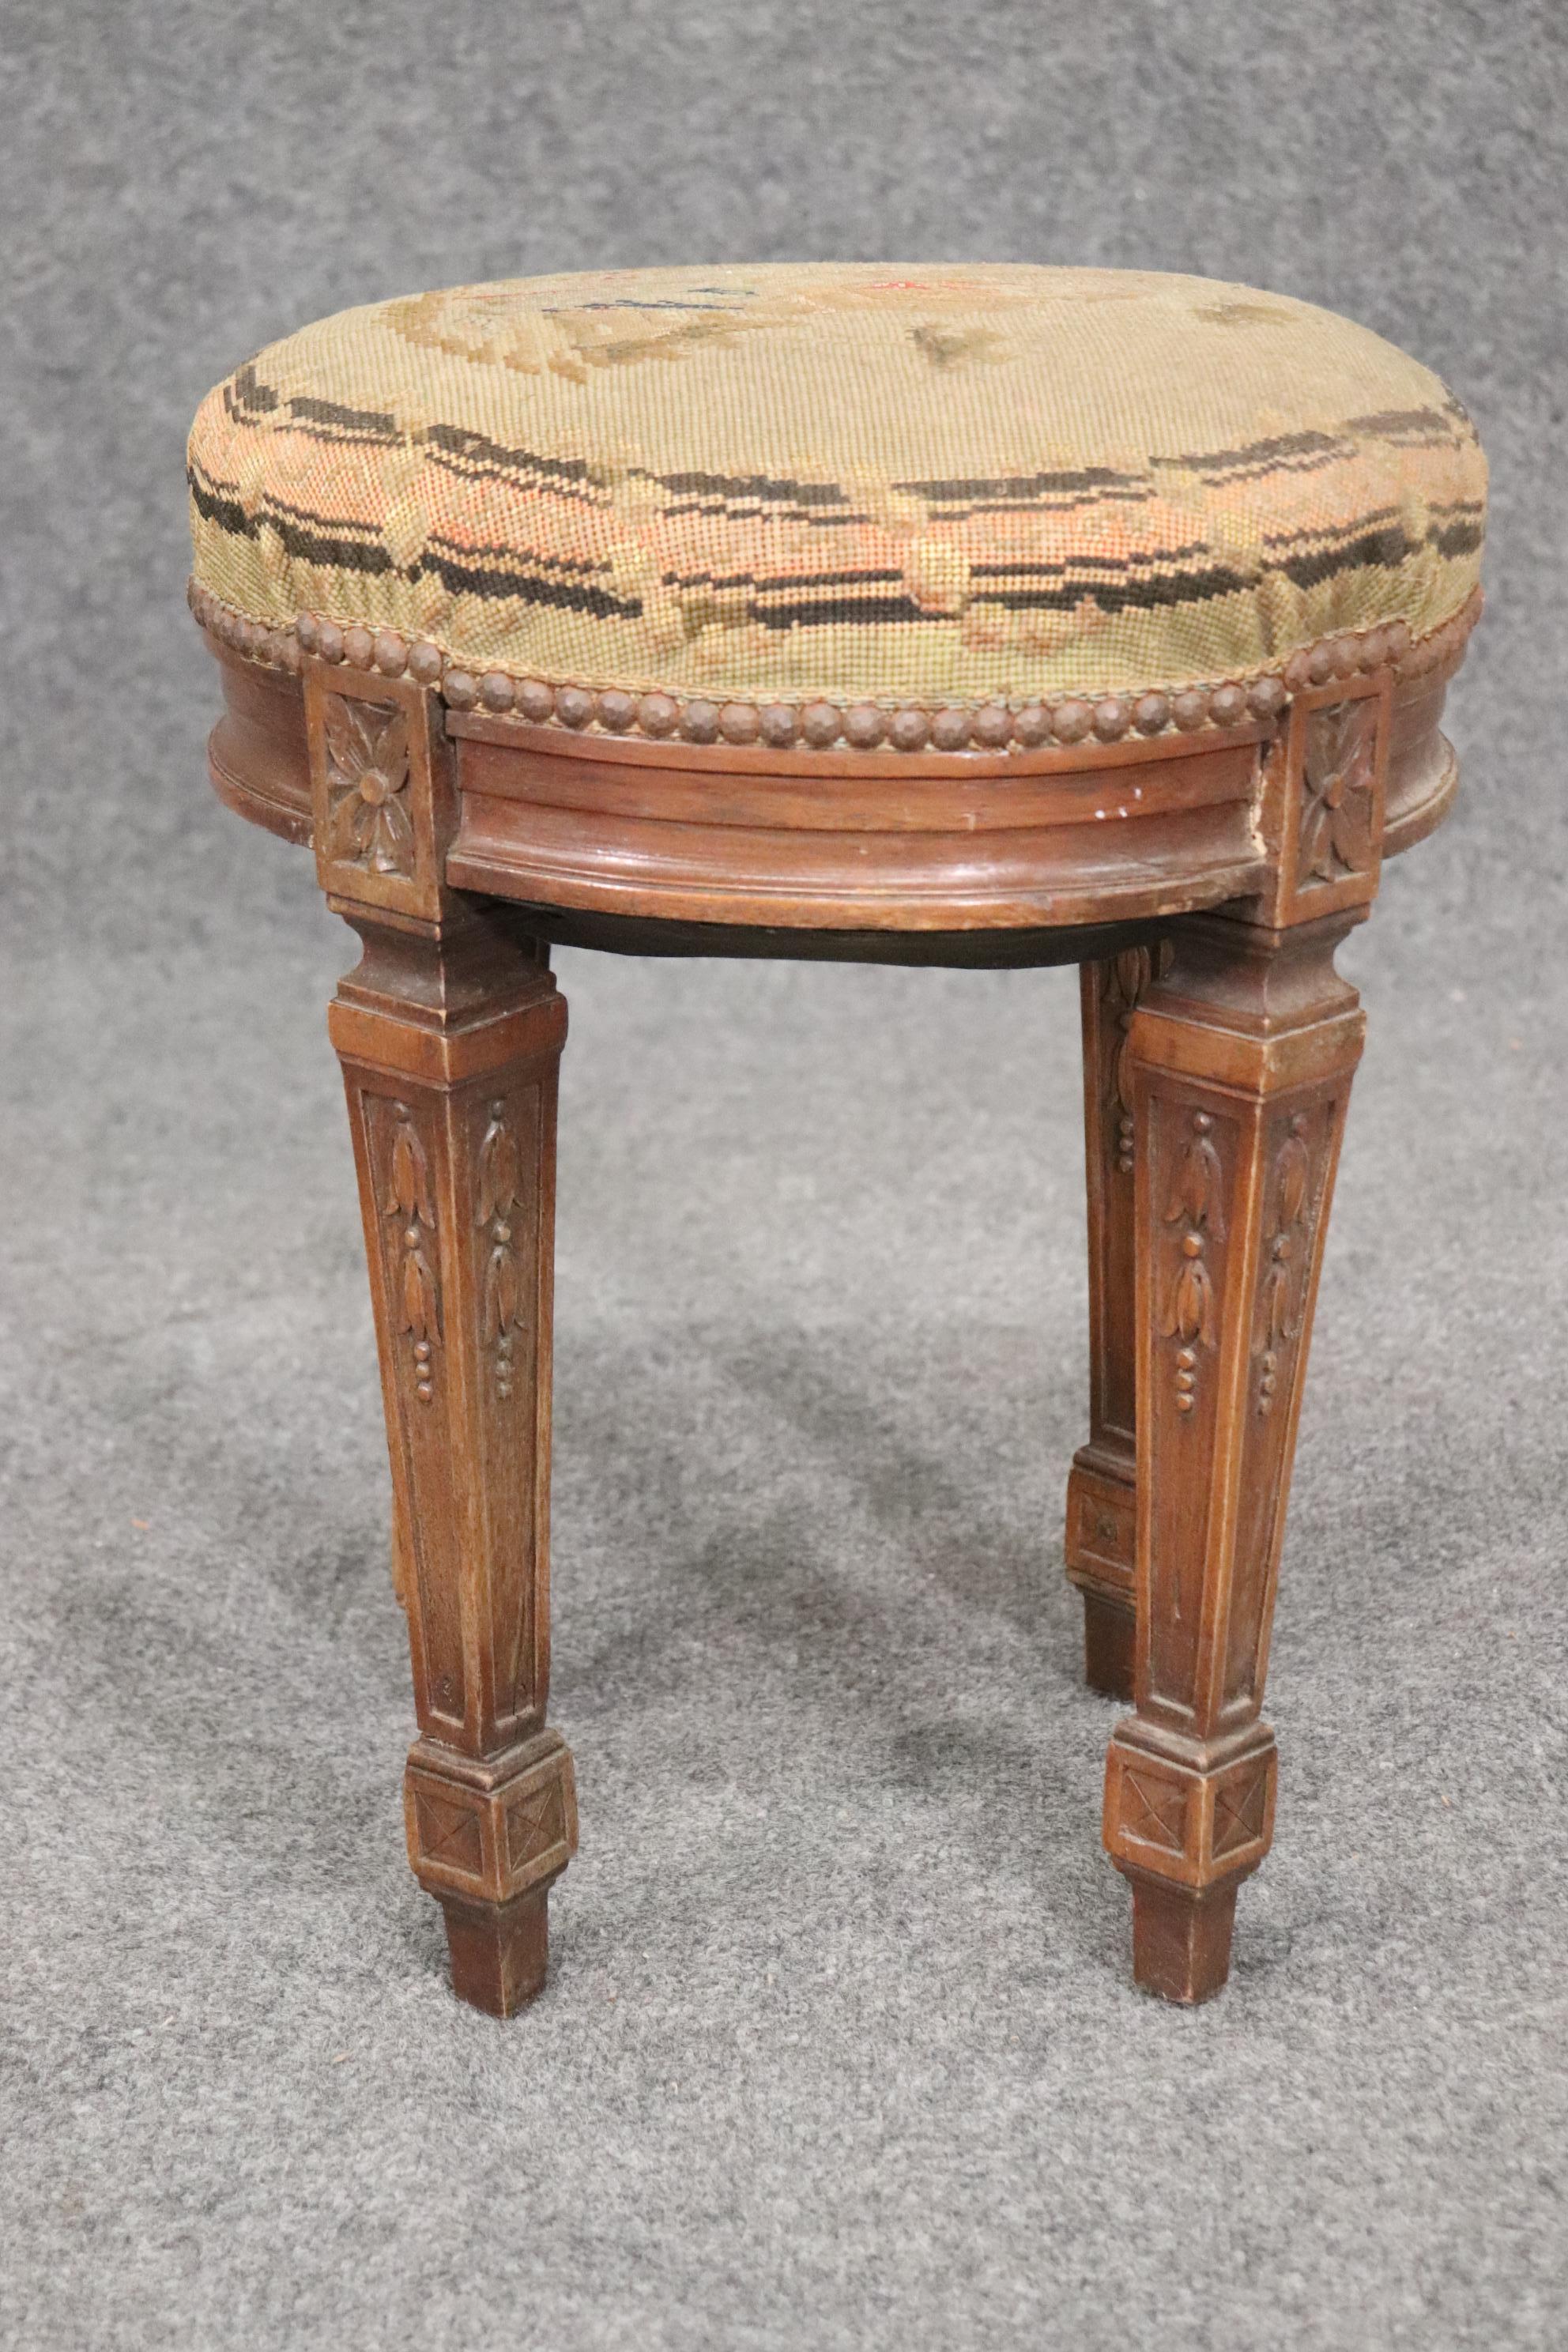 Early 20th Century Petite Antique French Louis XVI Walnut Tapestry Needlepoint Upholstered Stool